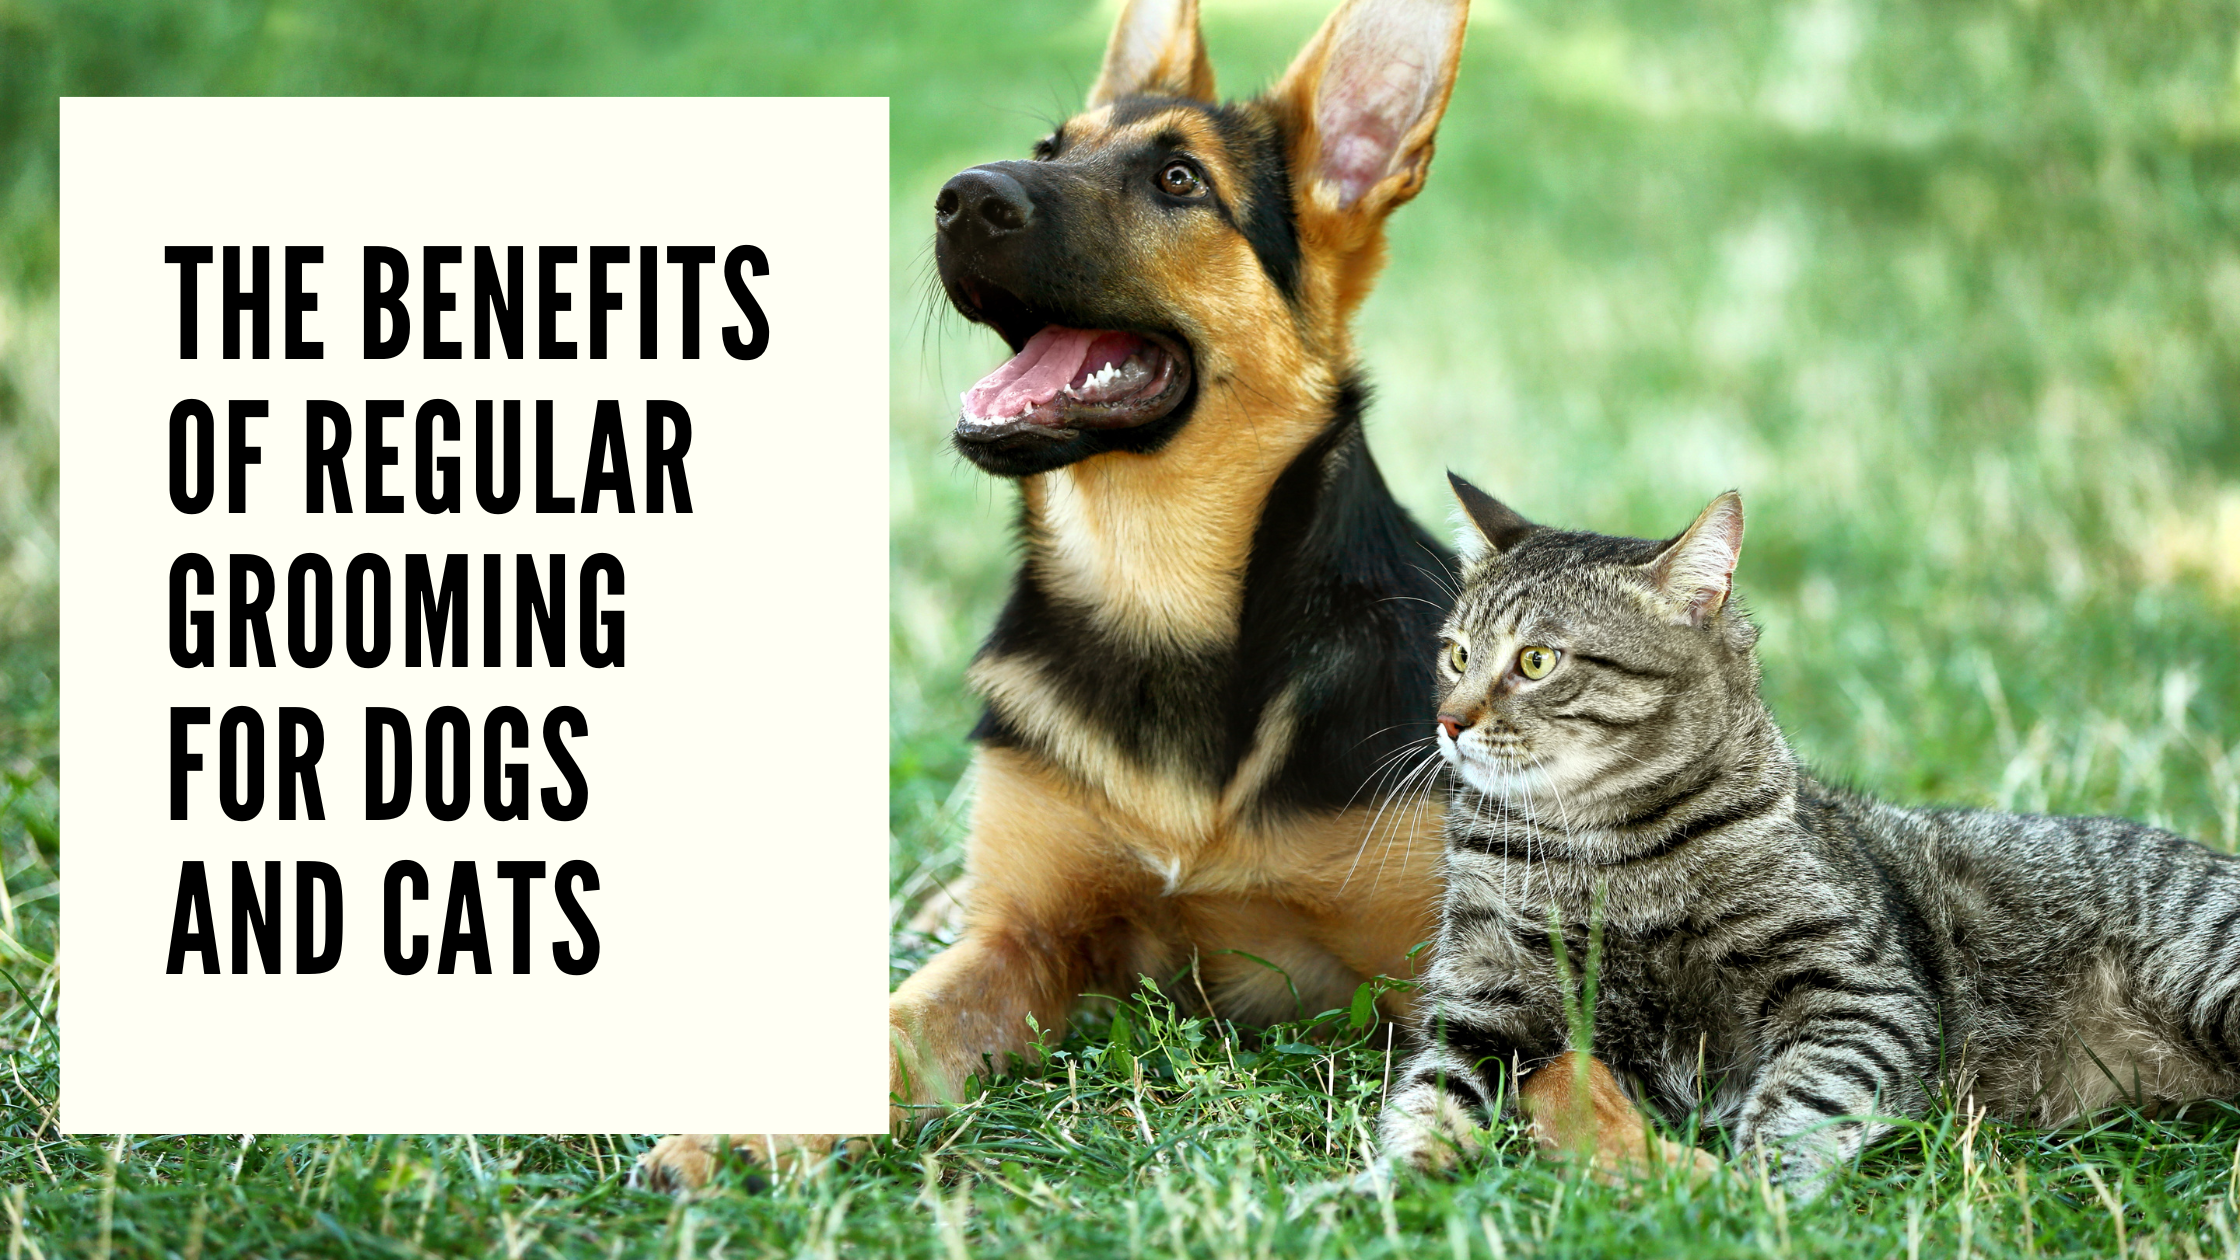 The Benefits of Regular Grooming for Dogs and Cats